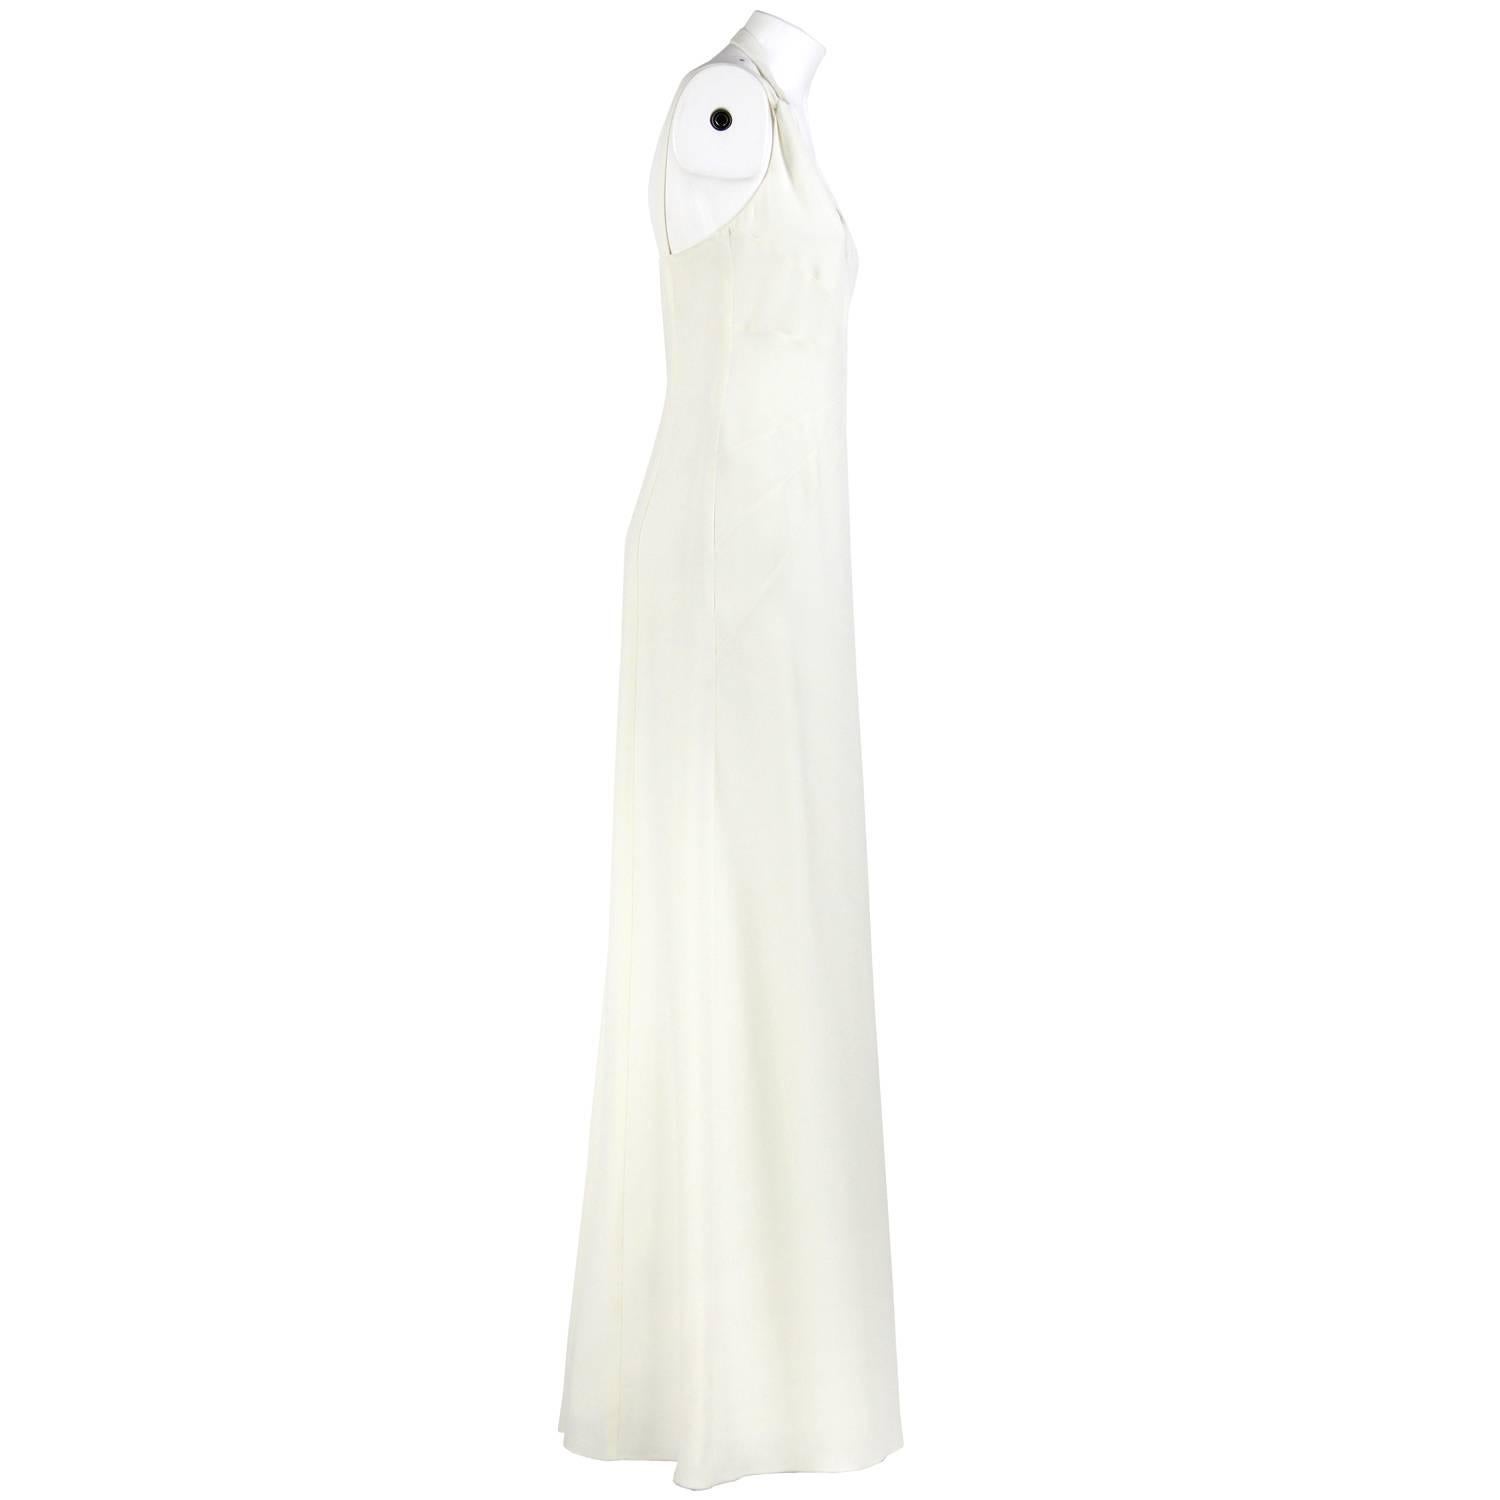 Marvelous Armani silk and acetate wedding dress in milk white color. Thin double straps, one fastened behind the neck . Pretty details on the front and zip closure on the back. The item was produced in the 2000s and is vintage, is in excellent